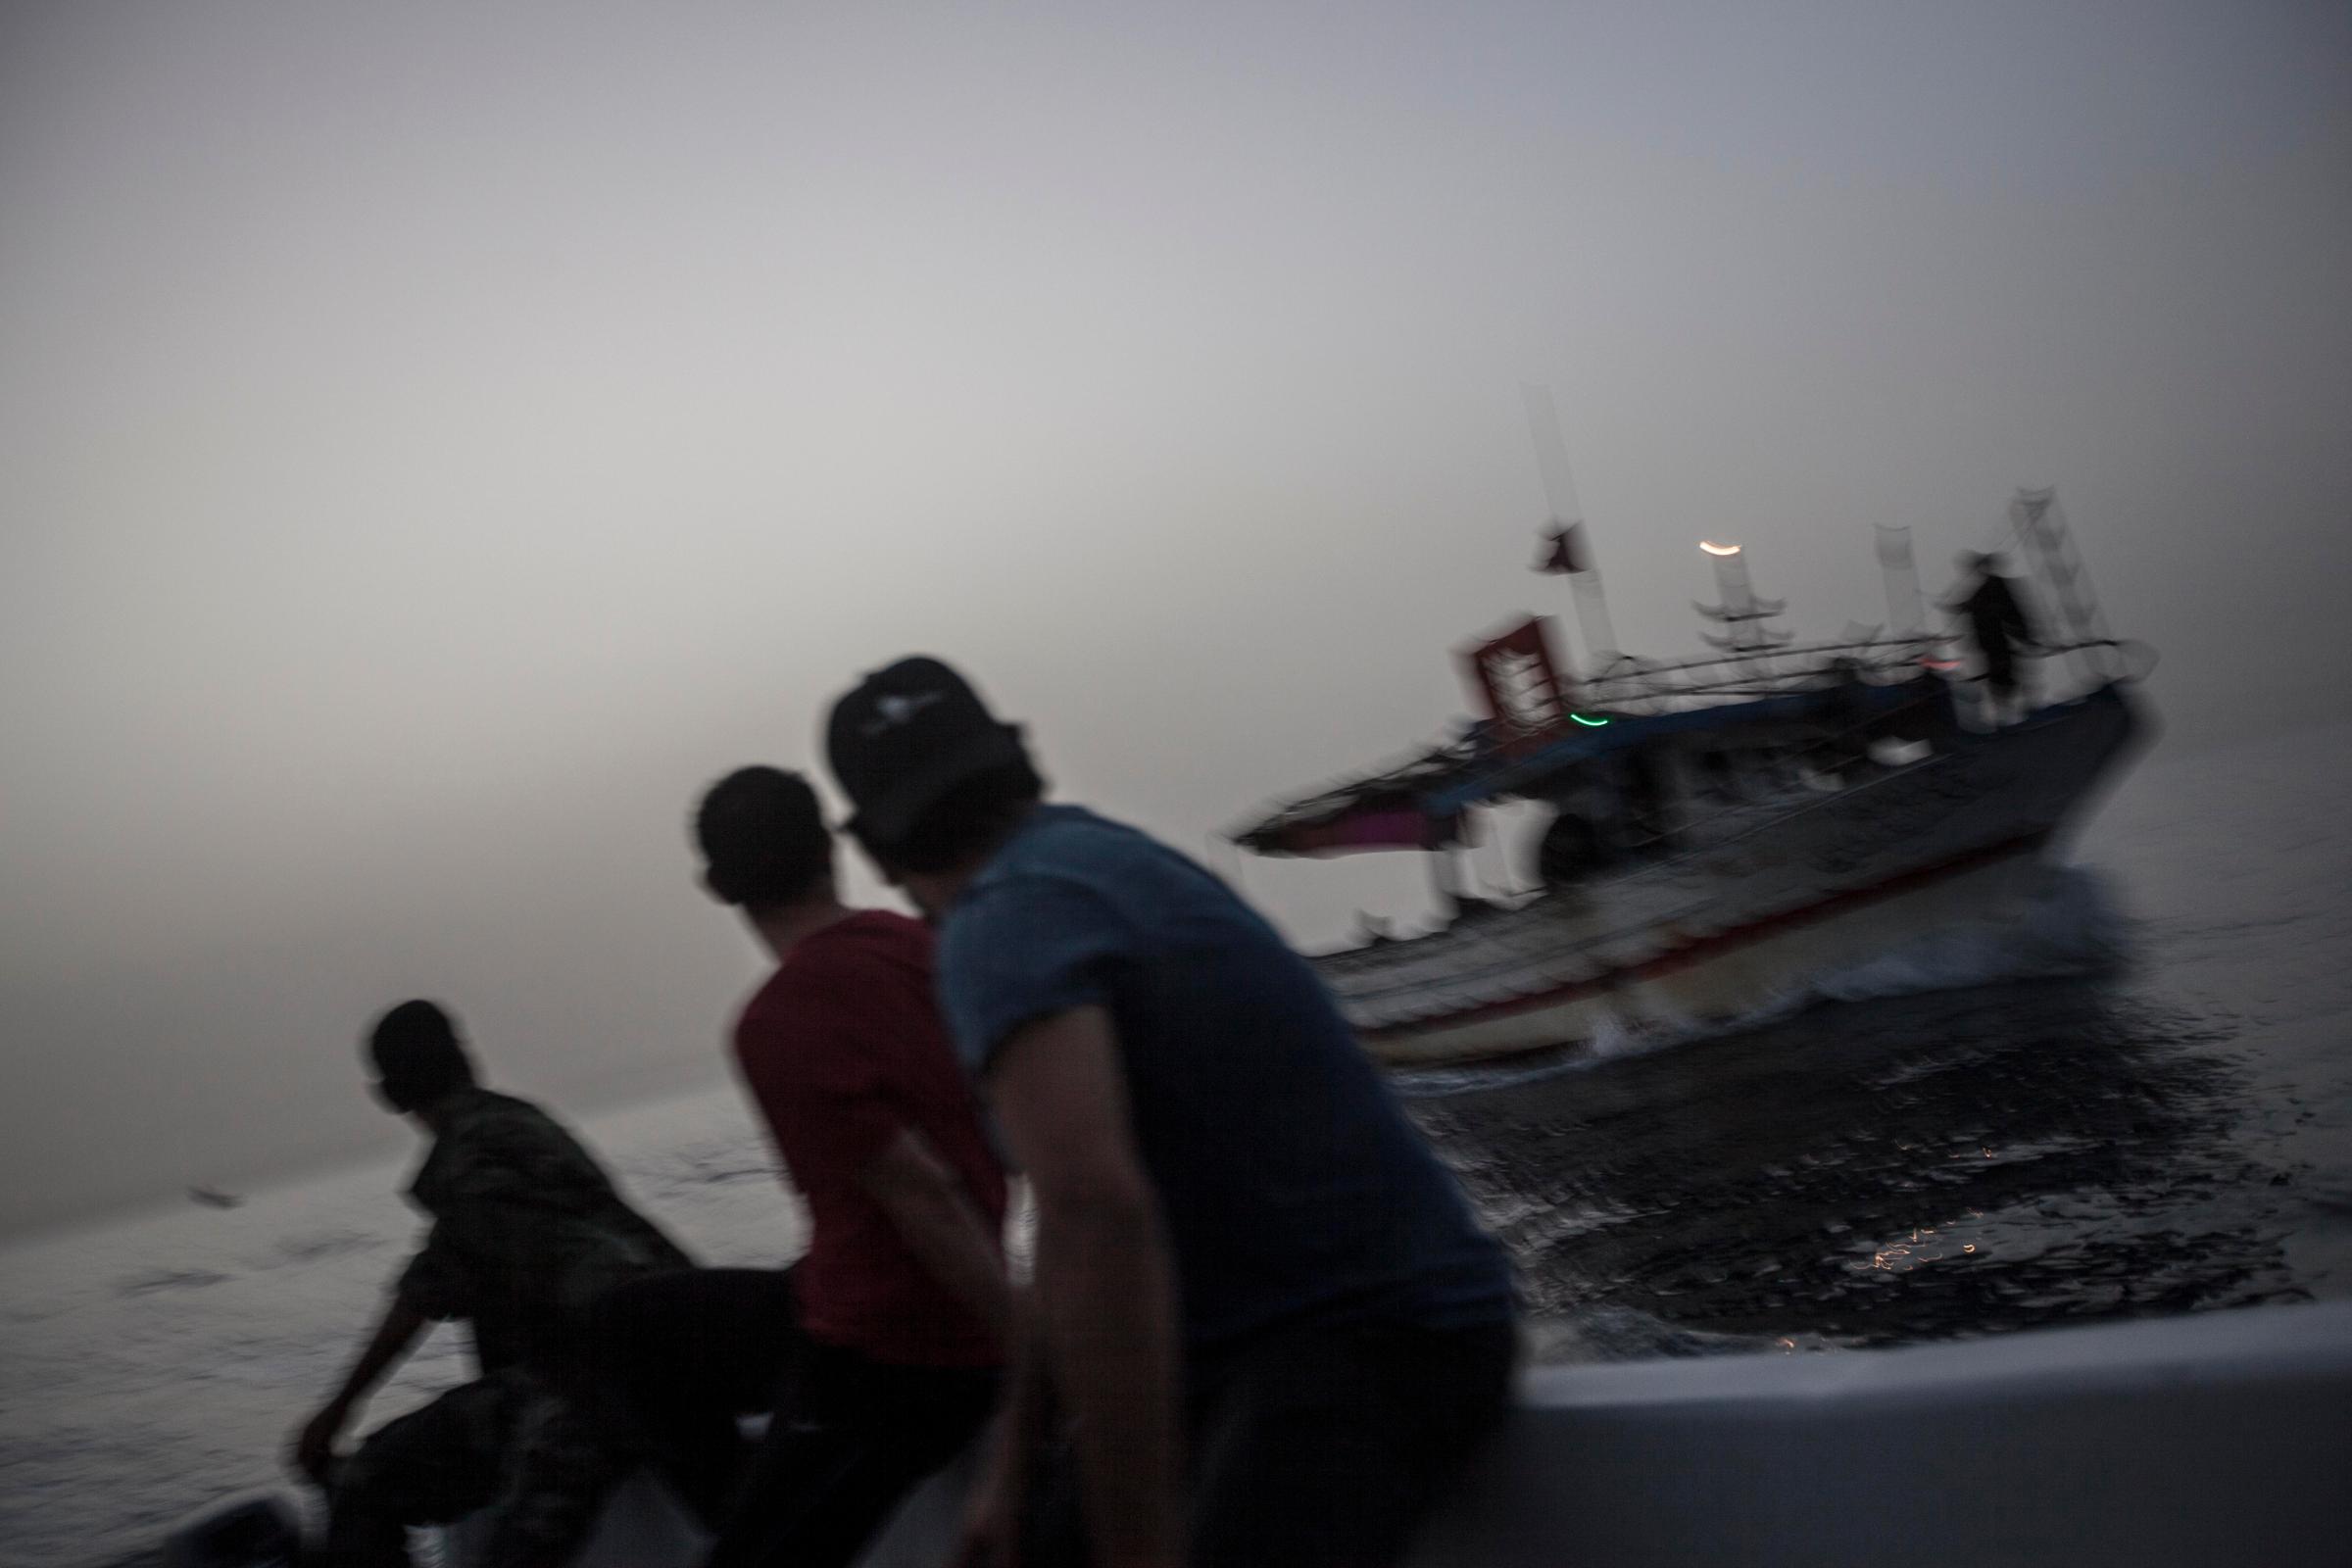 Libyan coastguards escort a boat back to Zawiyah after it was intercepted carrying out illegal activities.